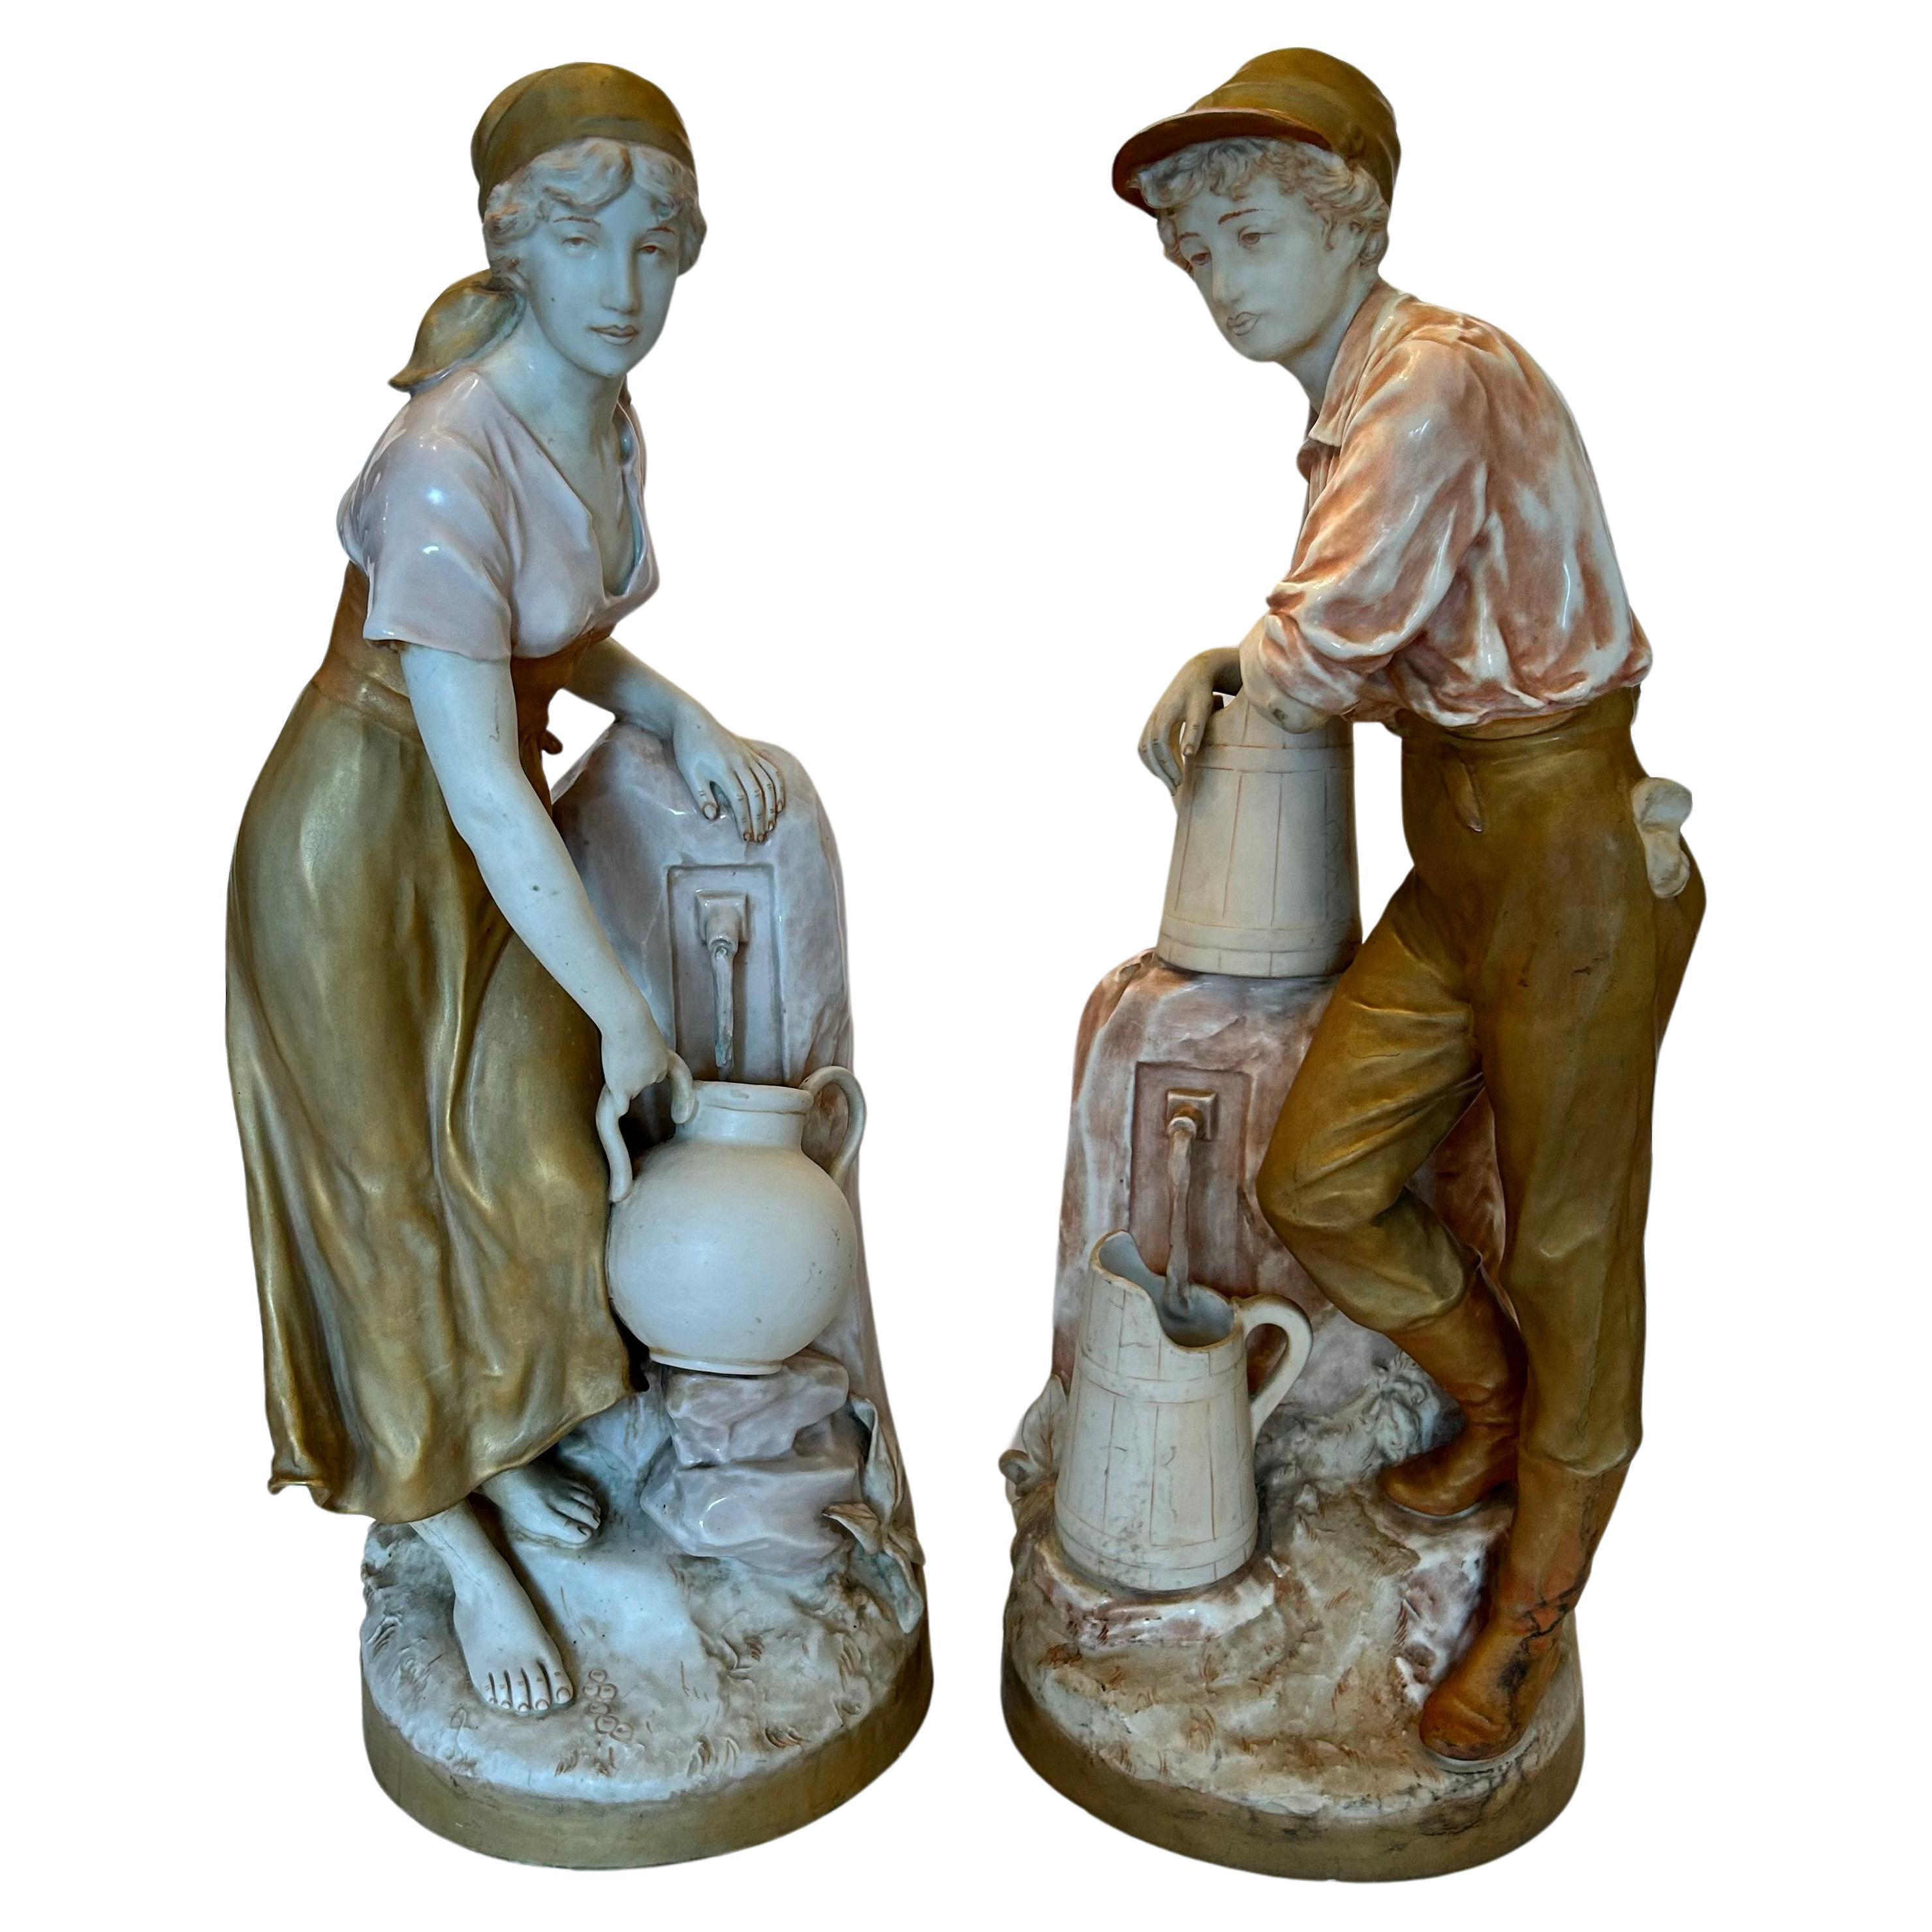 A beautiful pair of monumental biscuit porcelain figures made by renowned Royal Dux Bohemia, depicting a girl and boy, each one at a well. 
Stamped with the pink, triangular Royal Dux Bohemia E mark under the base.
Lovely porcelain biscuit